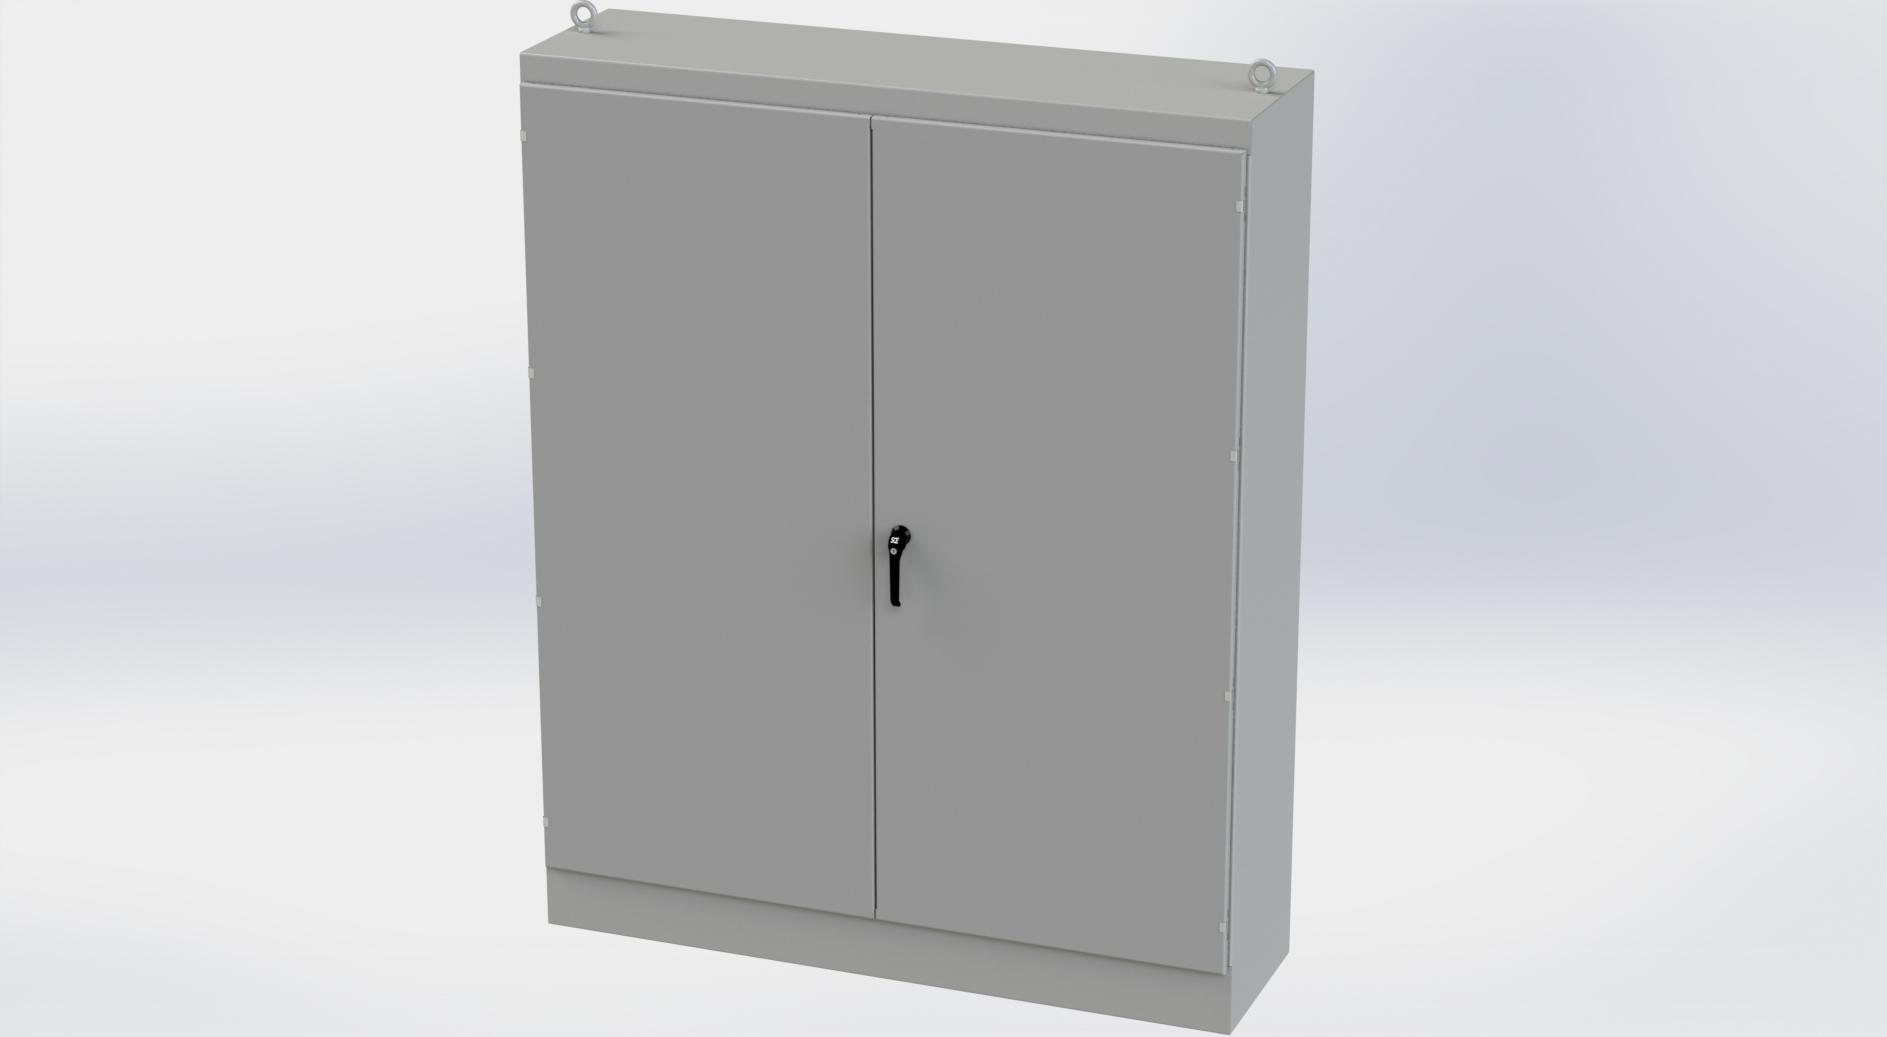 Saginaw Control SCE-907220FSD FSD Enclosure, Height:90.00", Width:72.00", Depth:20.00", ANSI-61 gray finish inside and out. Optional sub-panels are powder coated white.